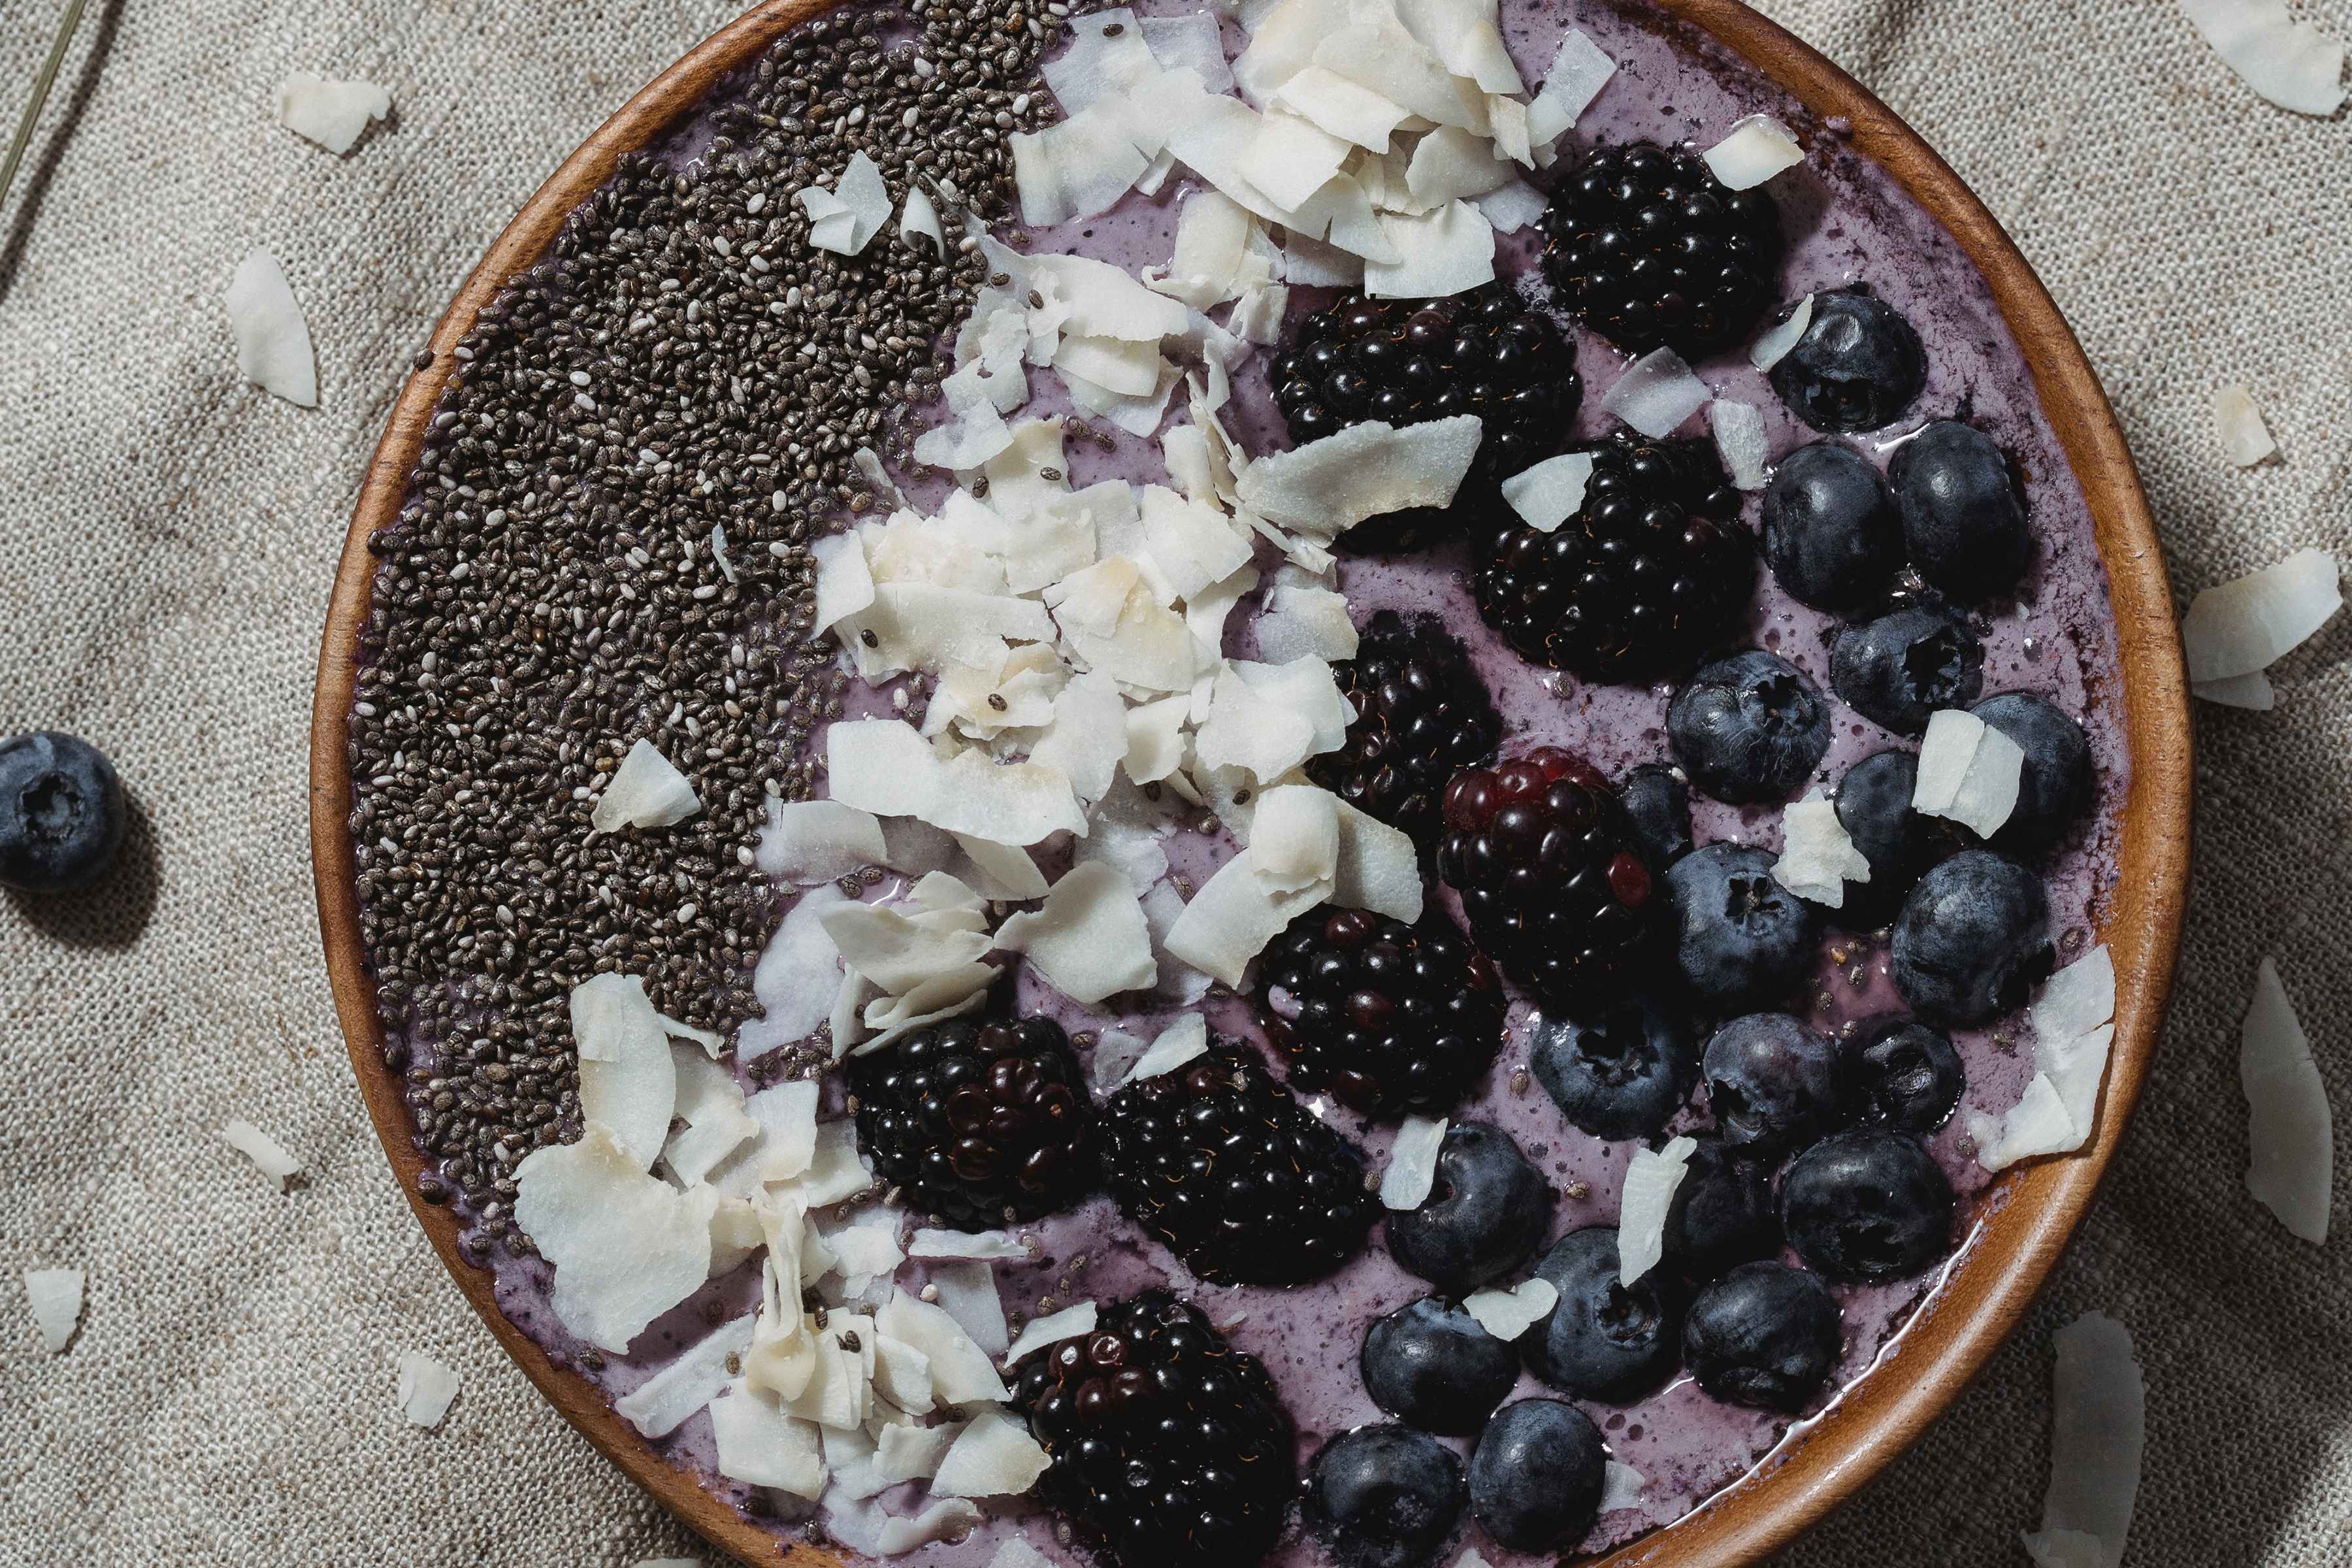 Blueberry smoothie bowl topped with chia seeds, flaked coconut, and mixed berries.